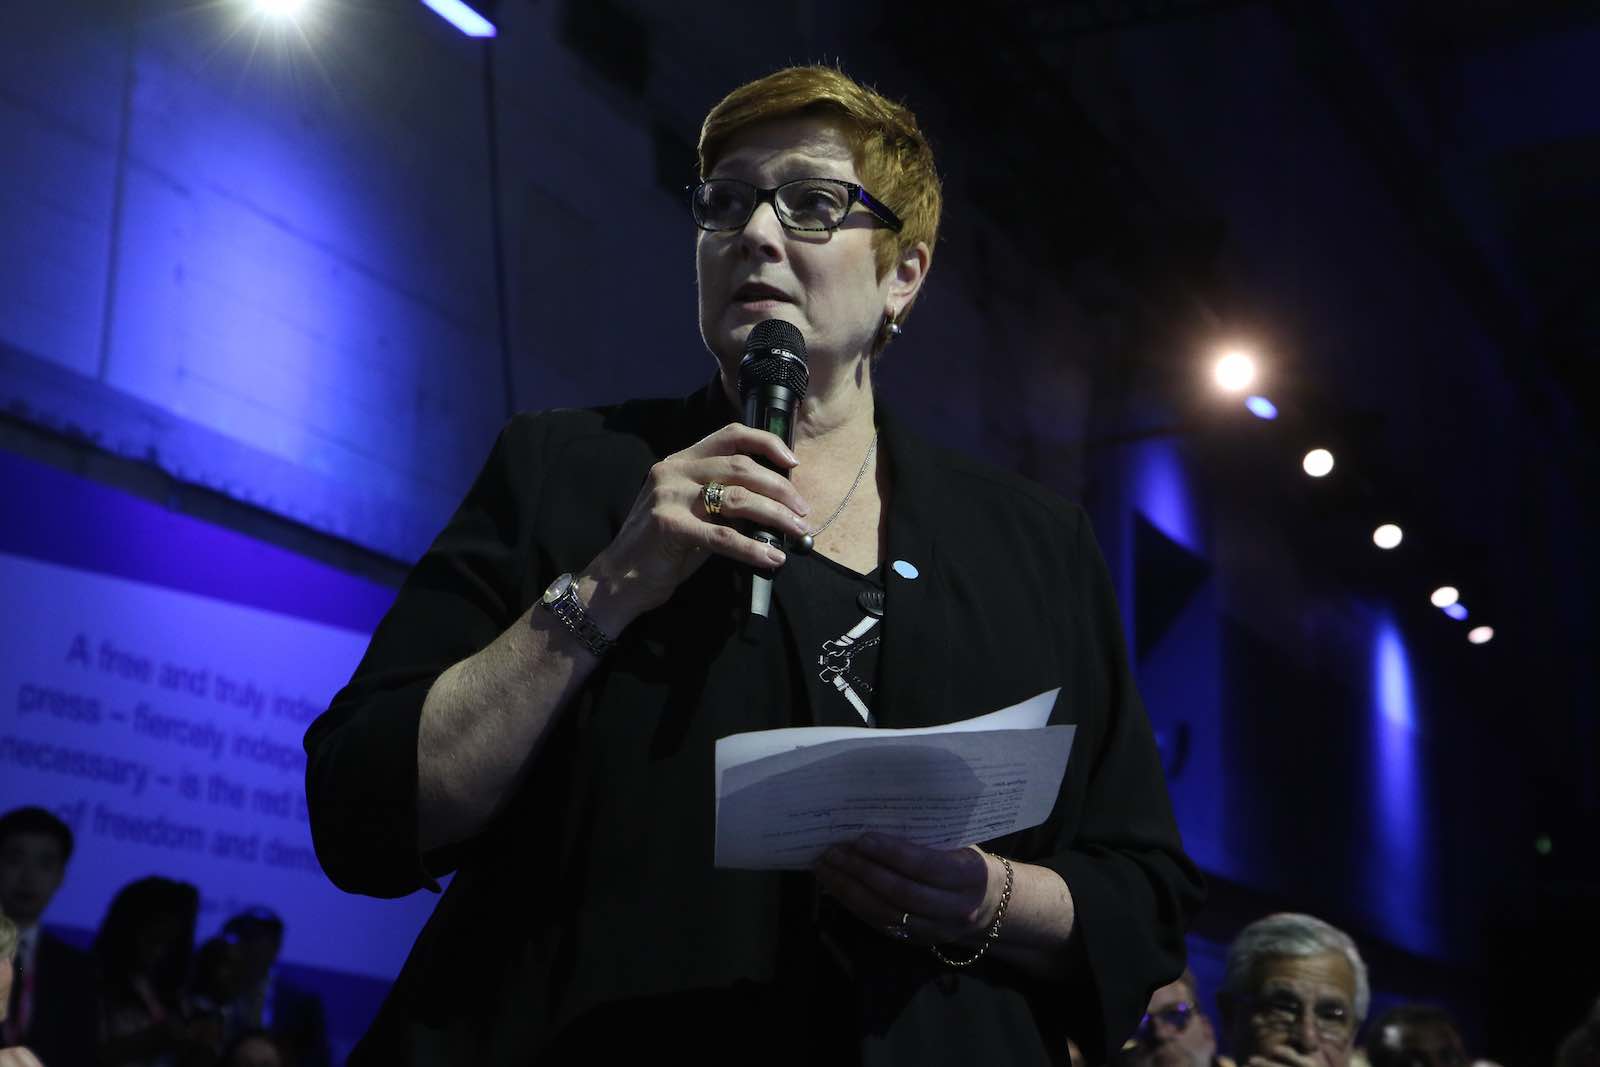 Foreign Minister Marise Payne (Photo: FCO/Flickr)